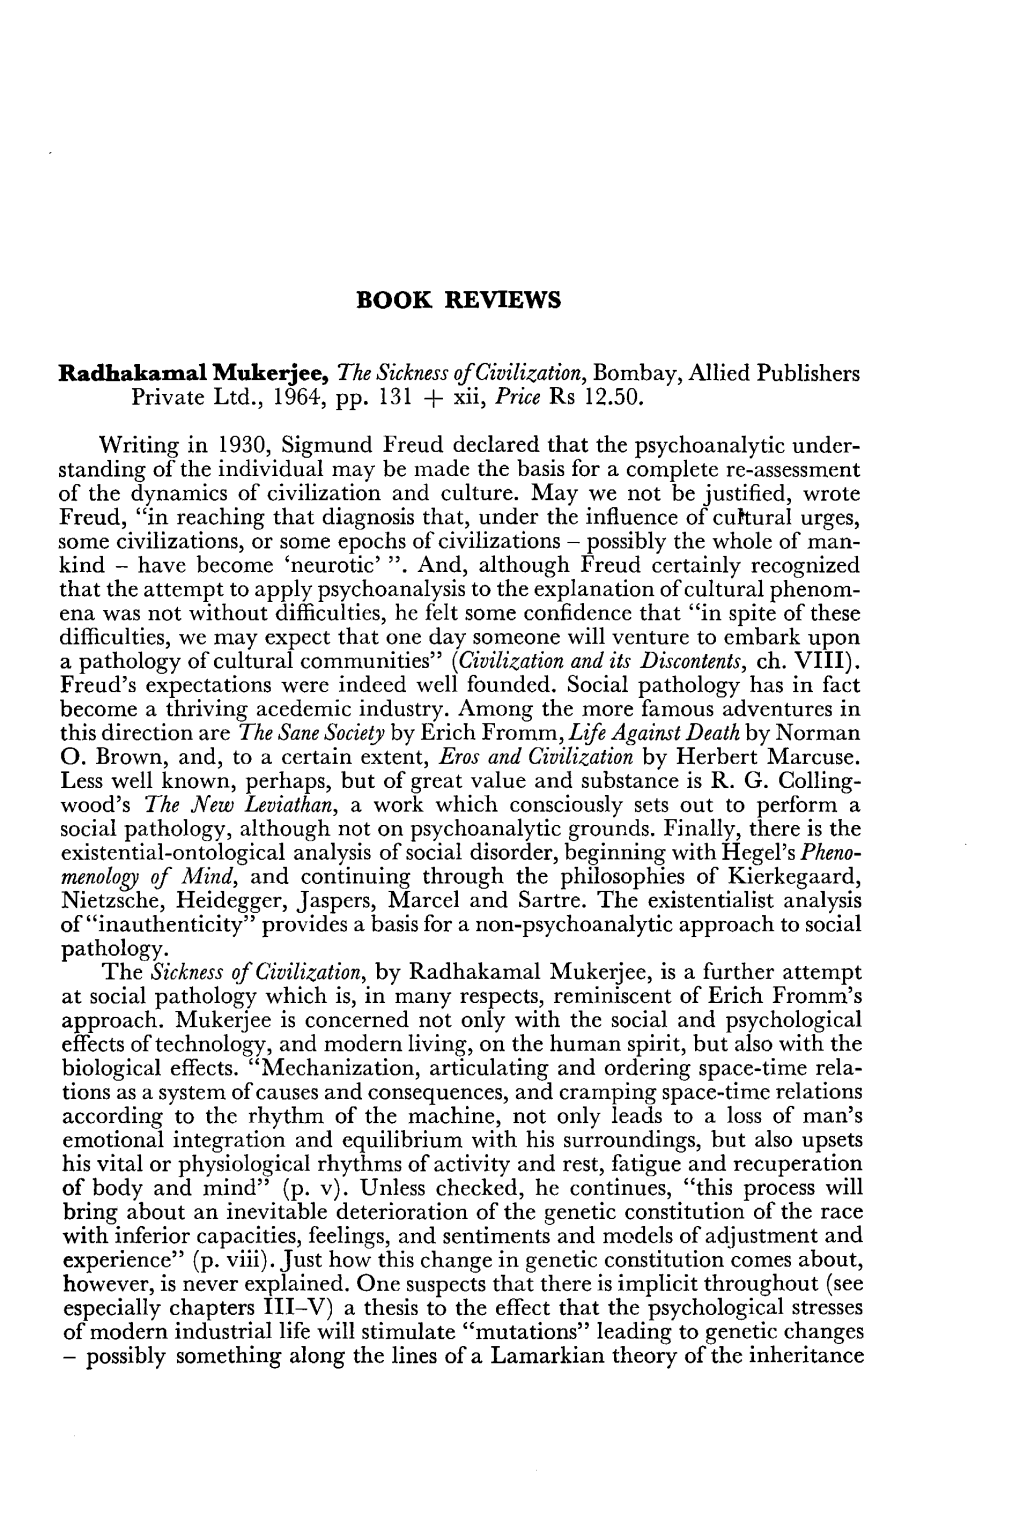 BOOK REVIEWS Radhakamal Mukerjee, the Sickness of Civilization, Bombay, Allied Publishers Private Ltd., 1964, Pp. 131 + Xii